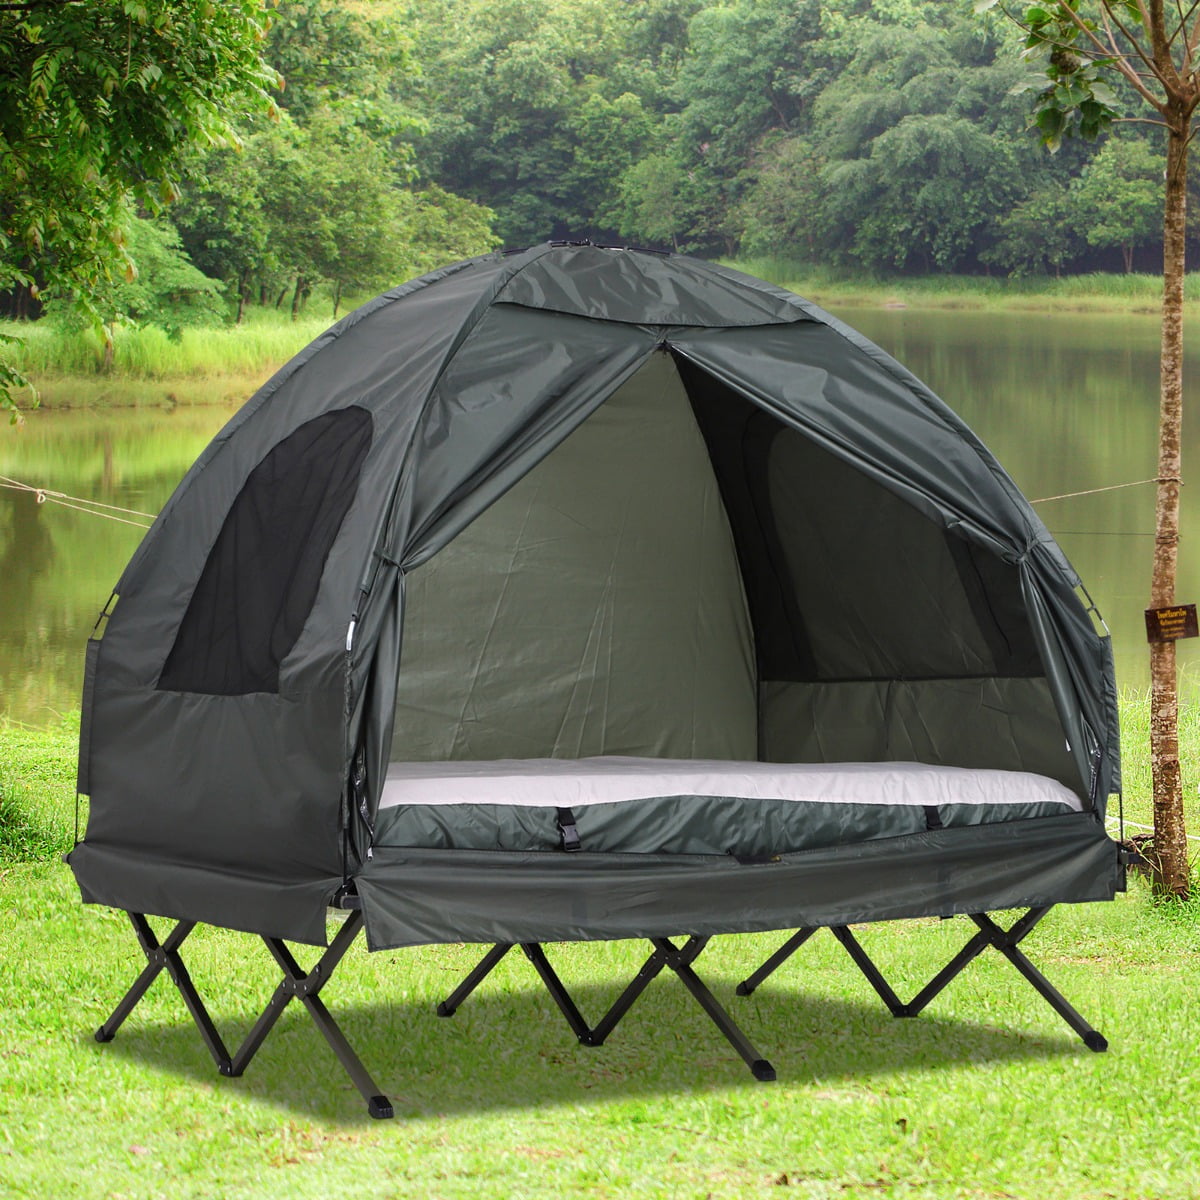 Pop-Up Tent Light Weight Camping Hiking Shelter Privacy Folds Up Flat 2 Person 